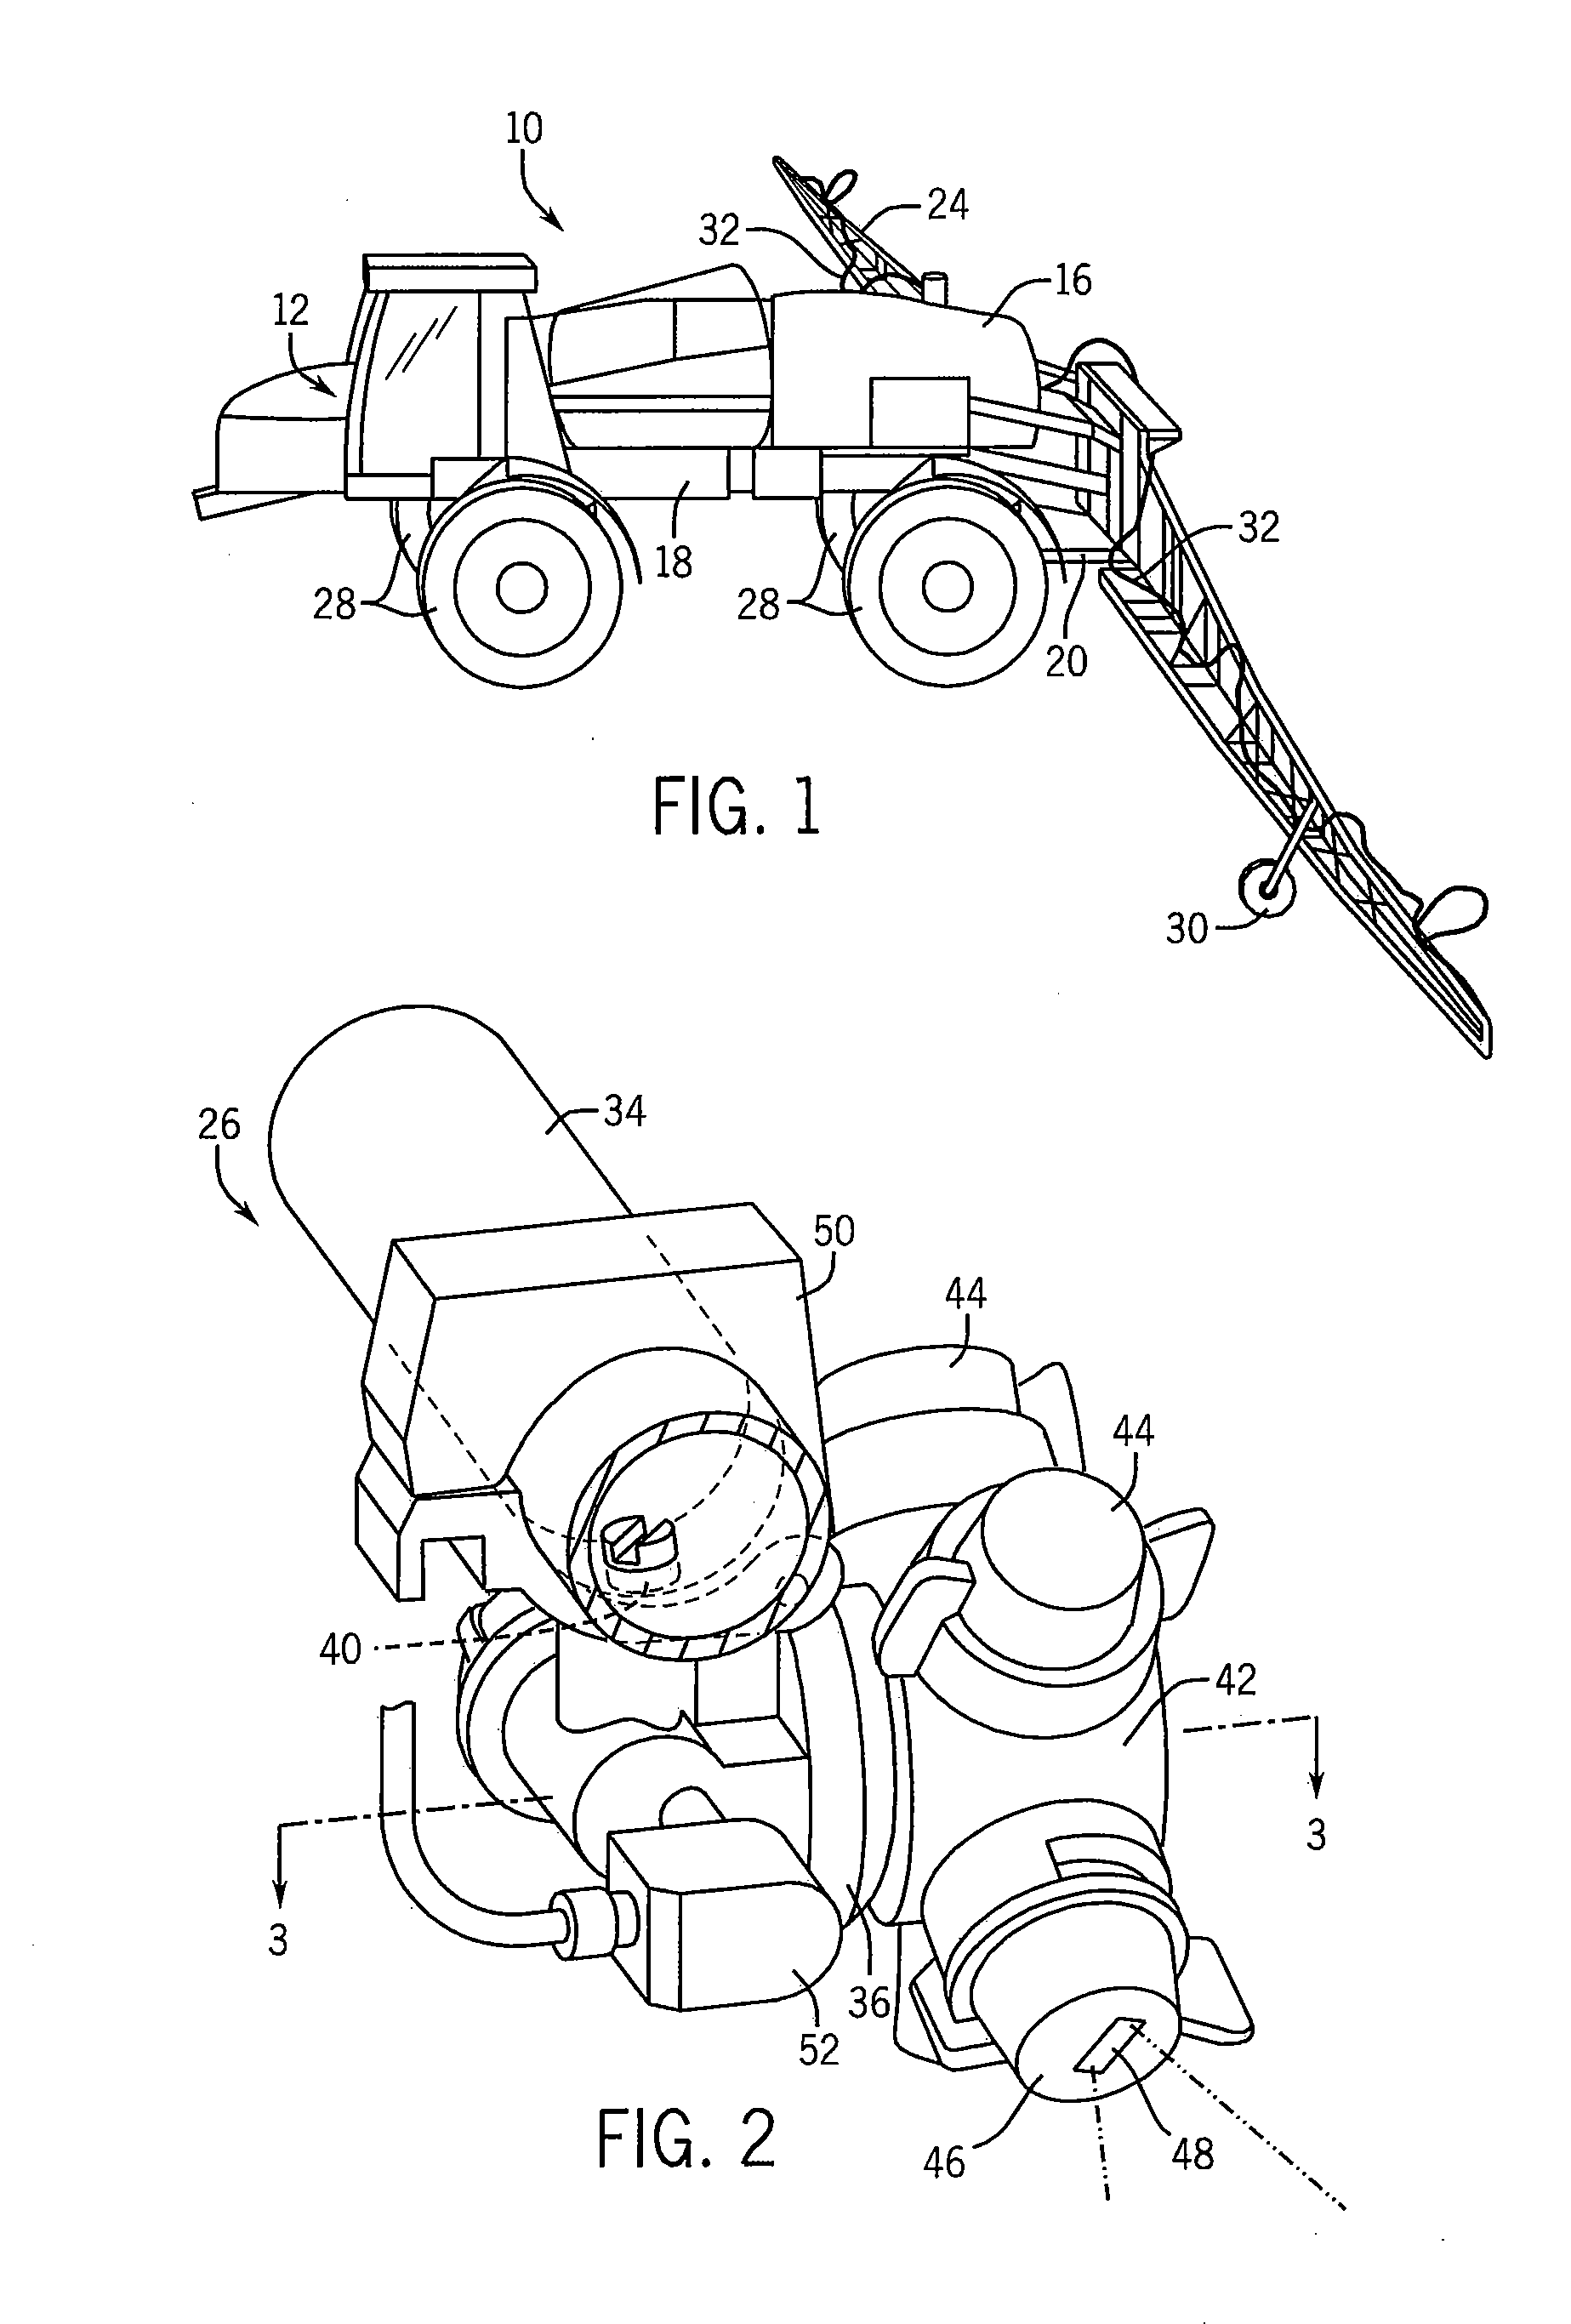 Method And Apparatus For Detecting A Plugged Nozzle Of A Sprayer